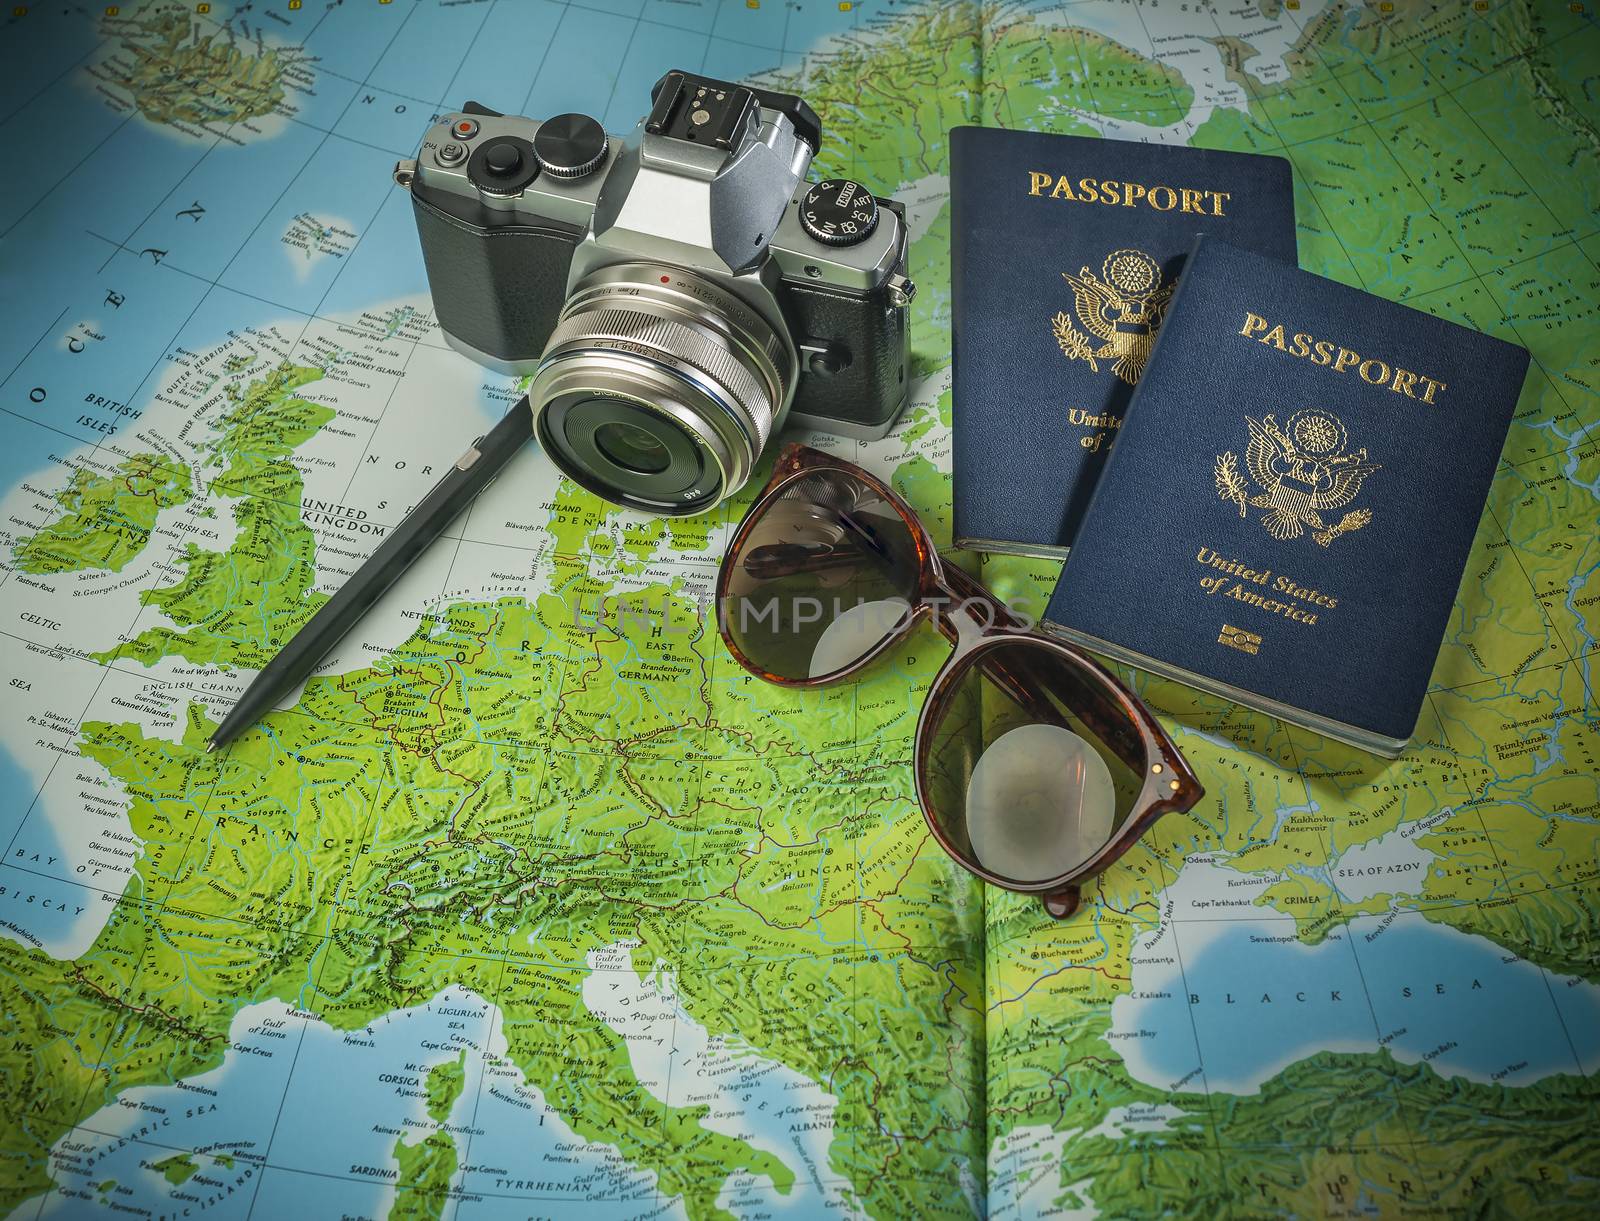 Passports for travel in Europe,camera and glasses on a map